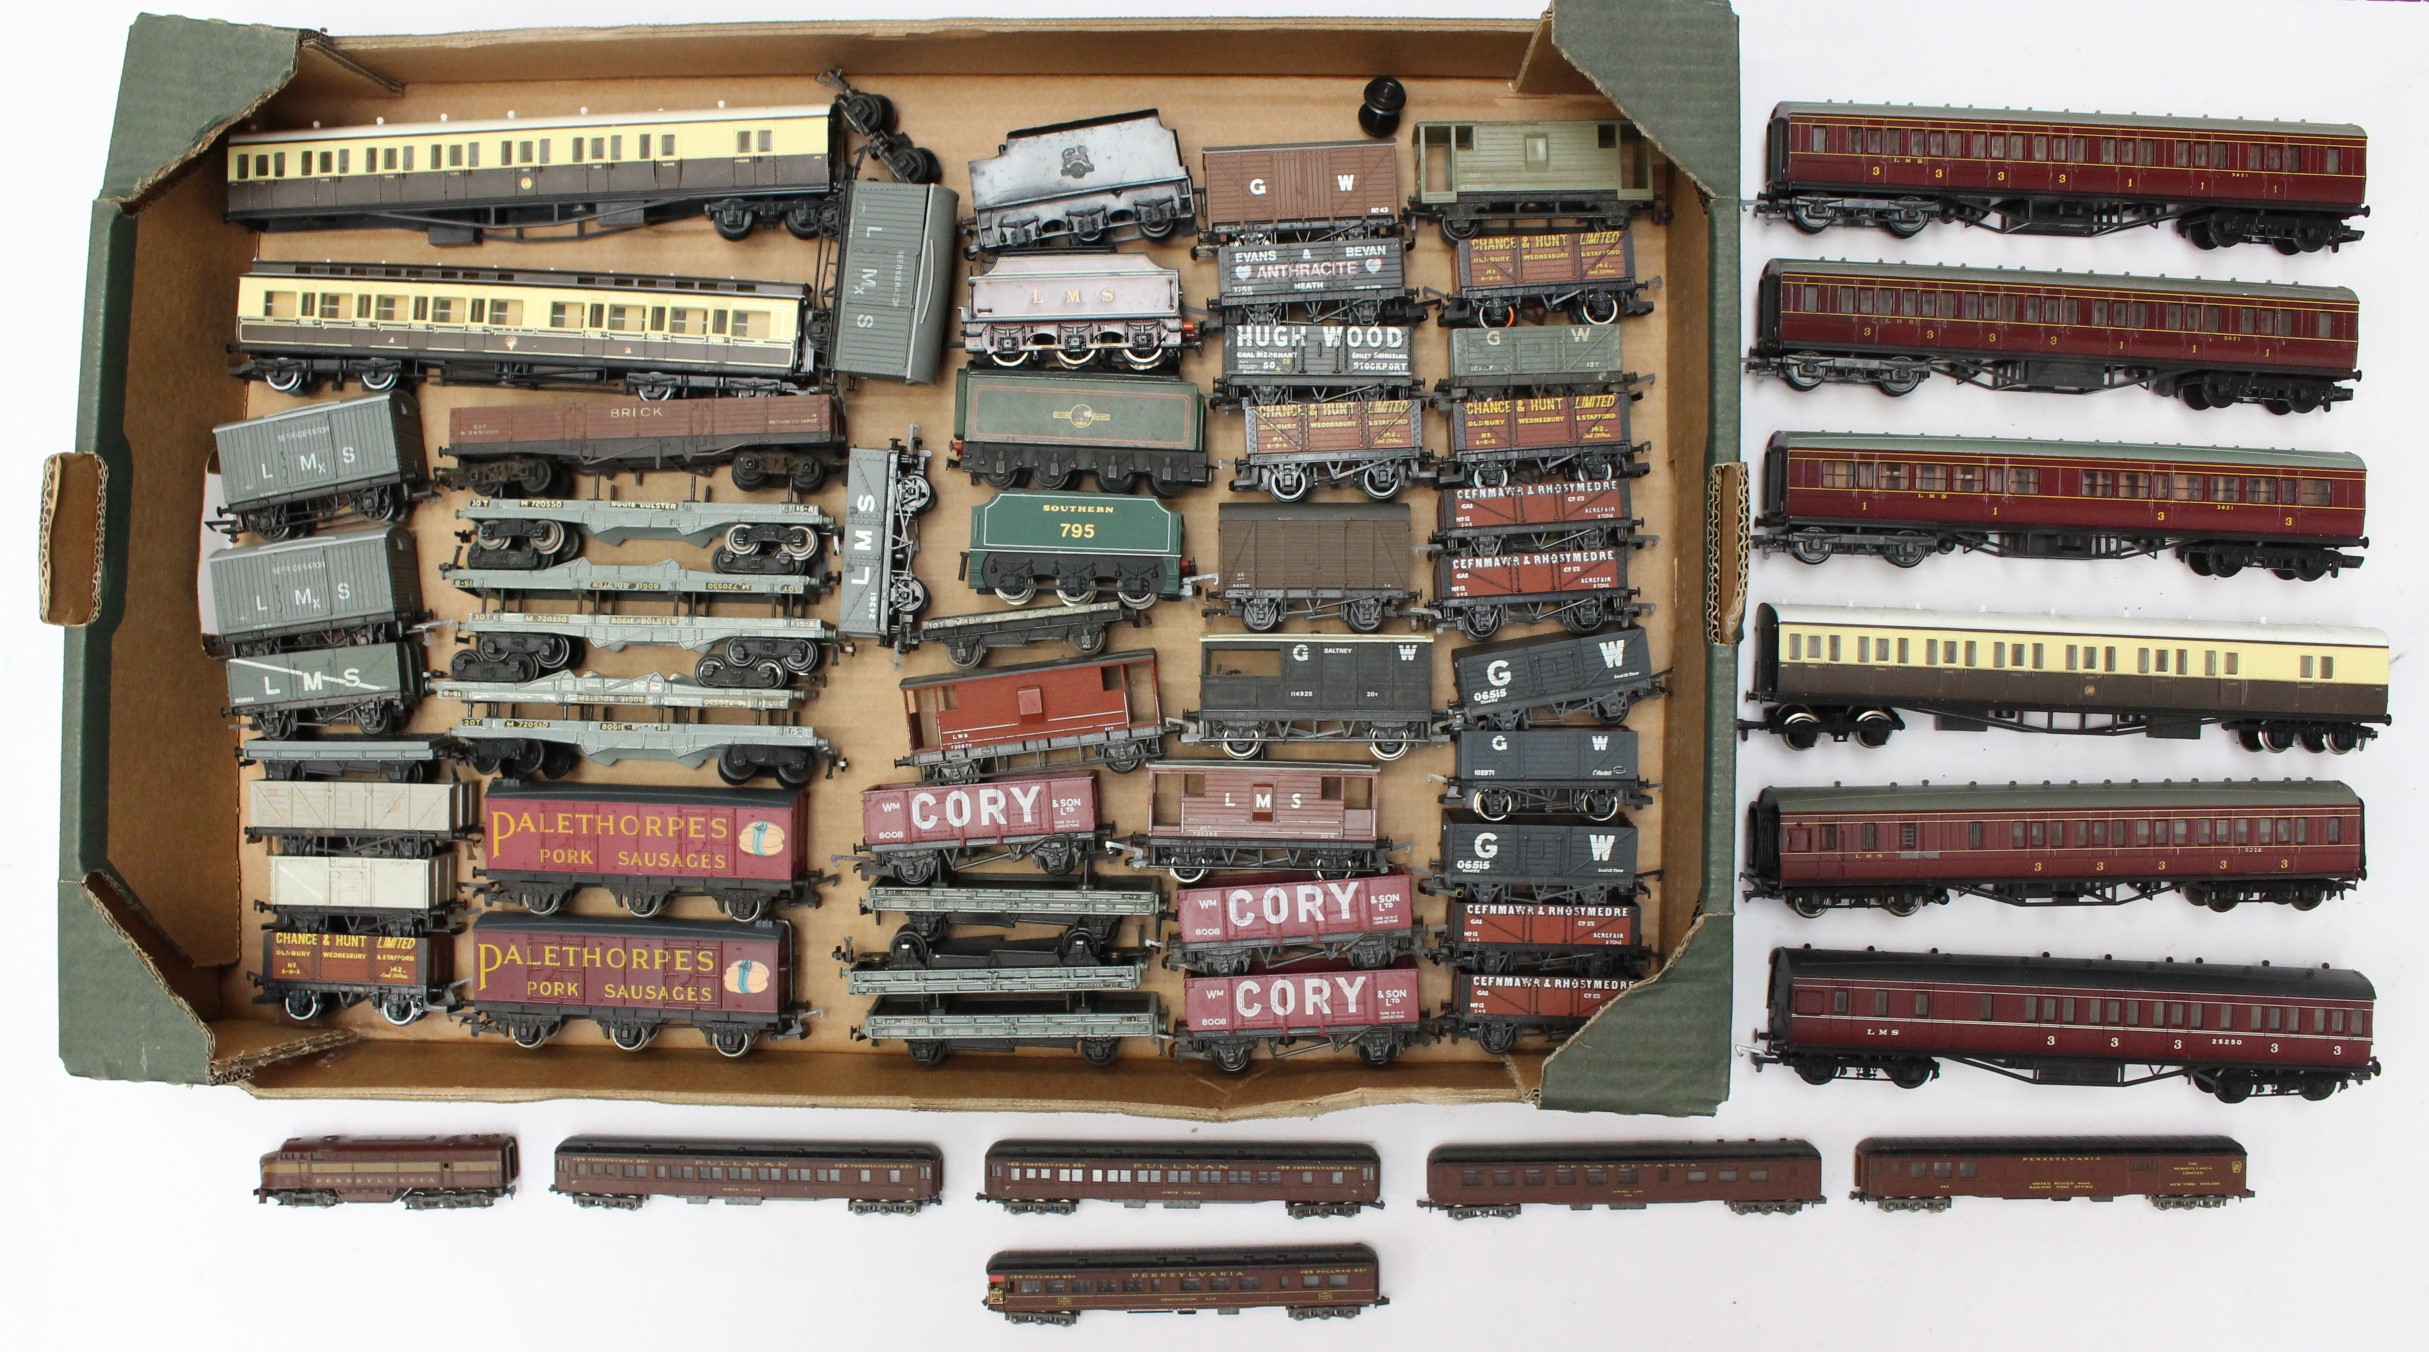 OO Gauge: A collection of assorted unboxed OO Gauge rolling stock and coaches of varying